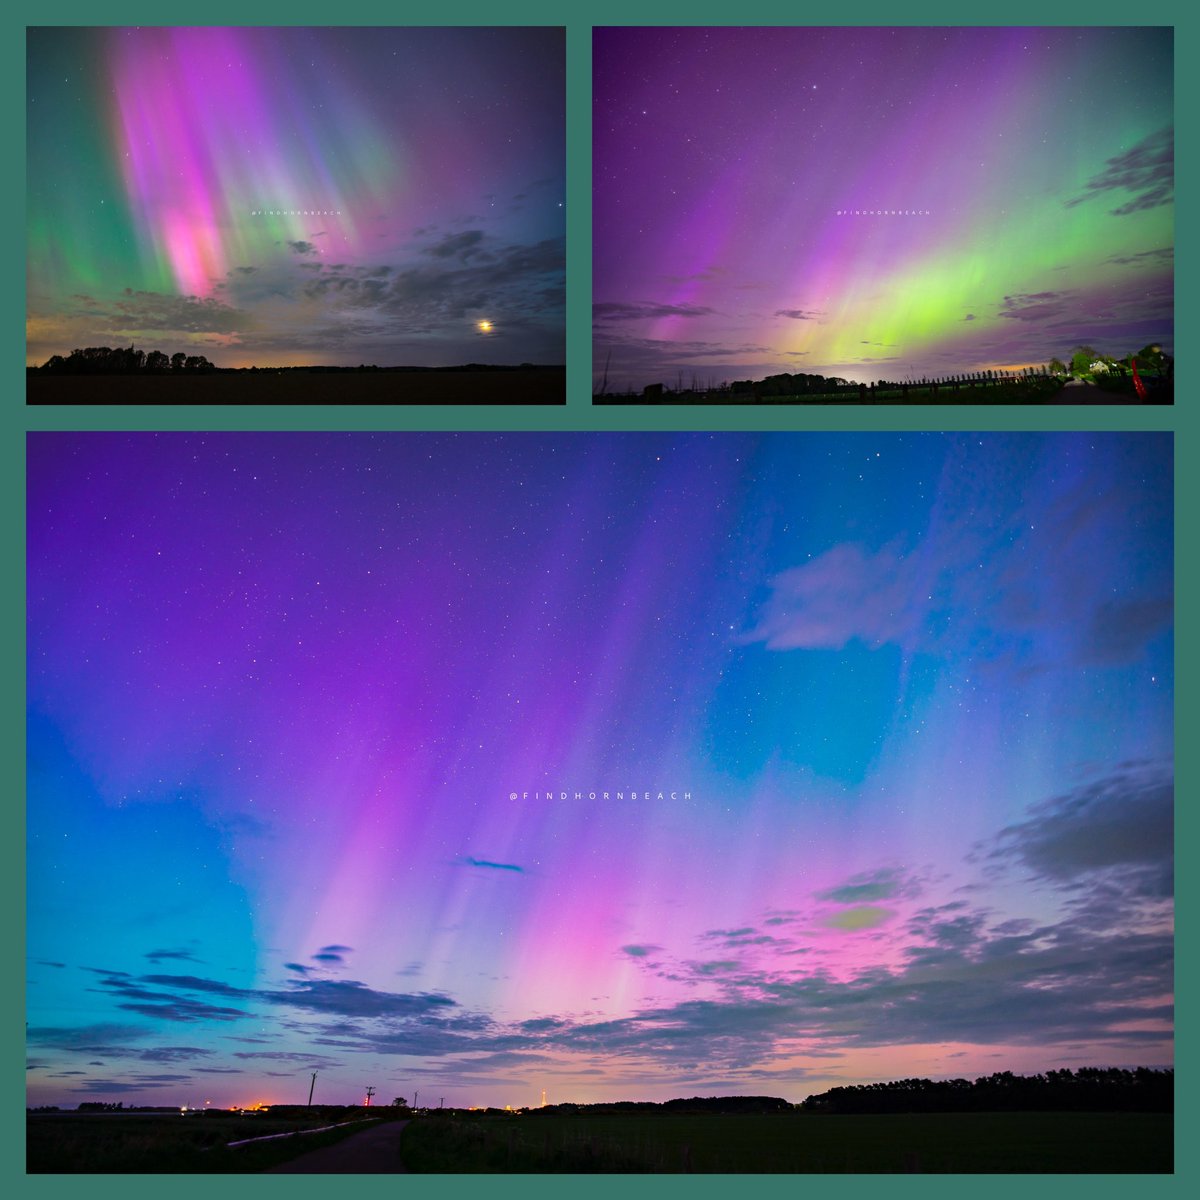 More northern lights photography from the other night that illuminated the scottish landscape.

#moray #scotland #findhorn #findhornbeach #morayfirth #scottishhighlands #highlands #grampian #northernlights #auroraborealis